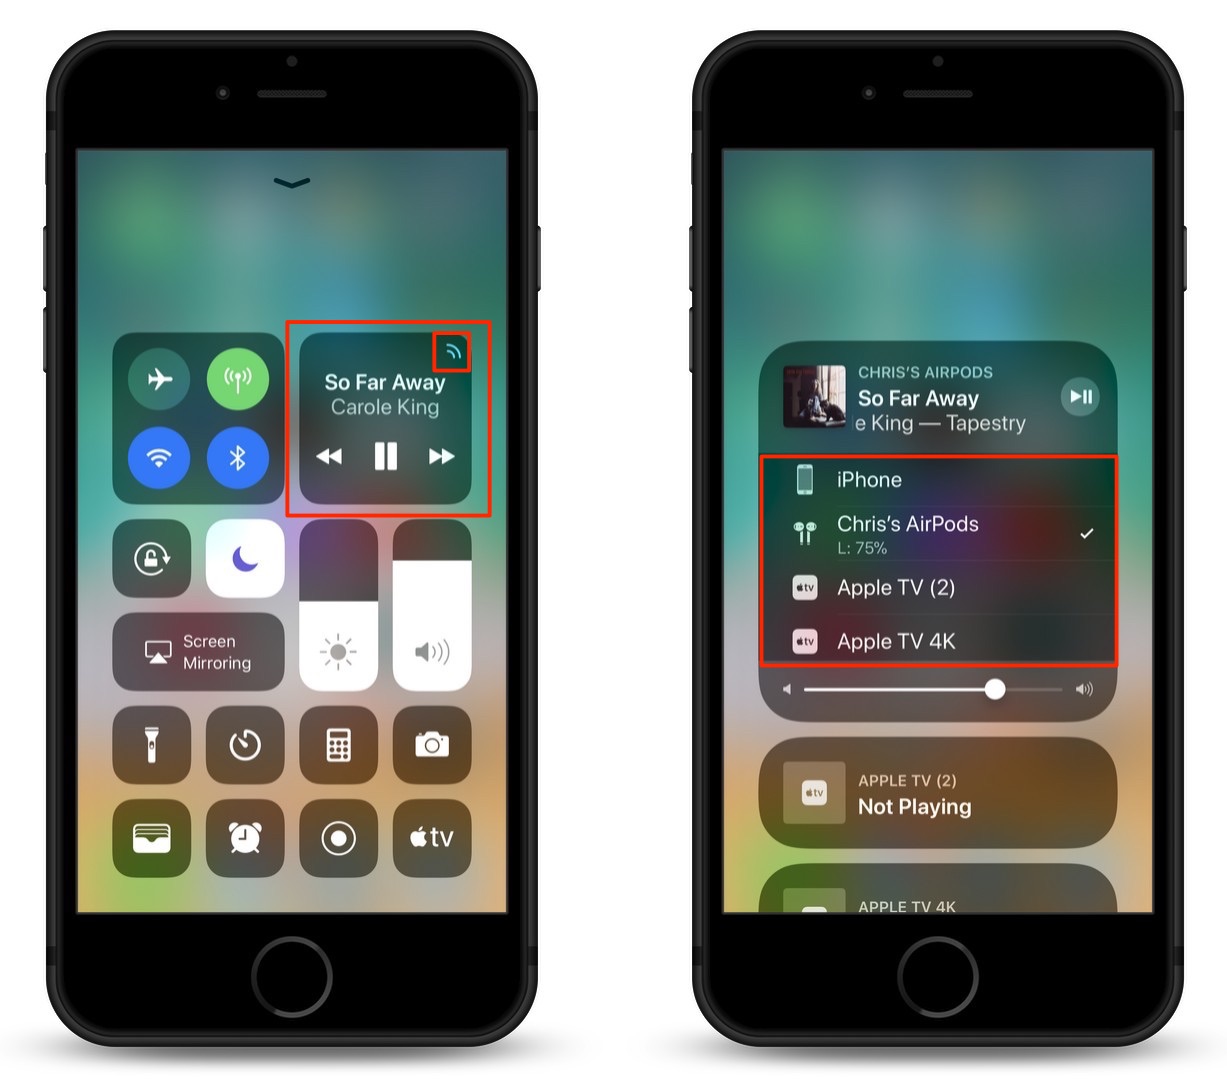 How To Switch Bluetooth Devices in the iOS 11 Control Center